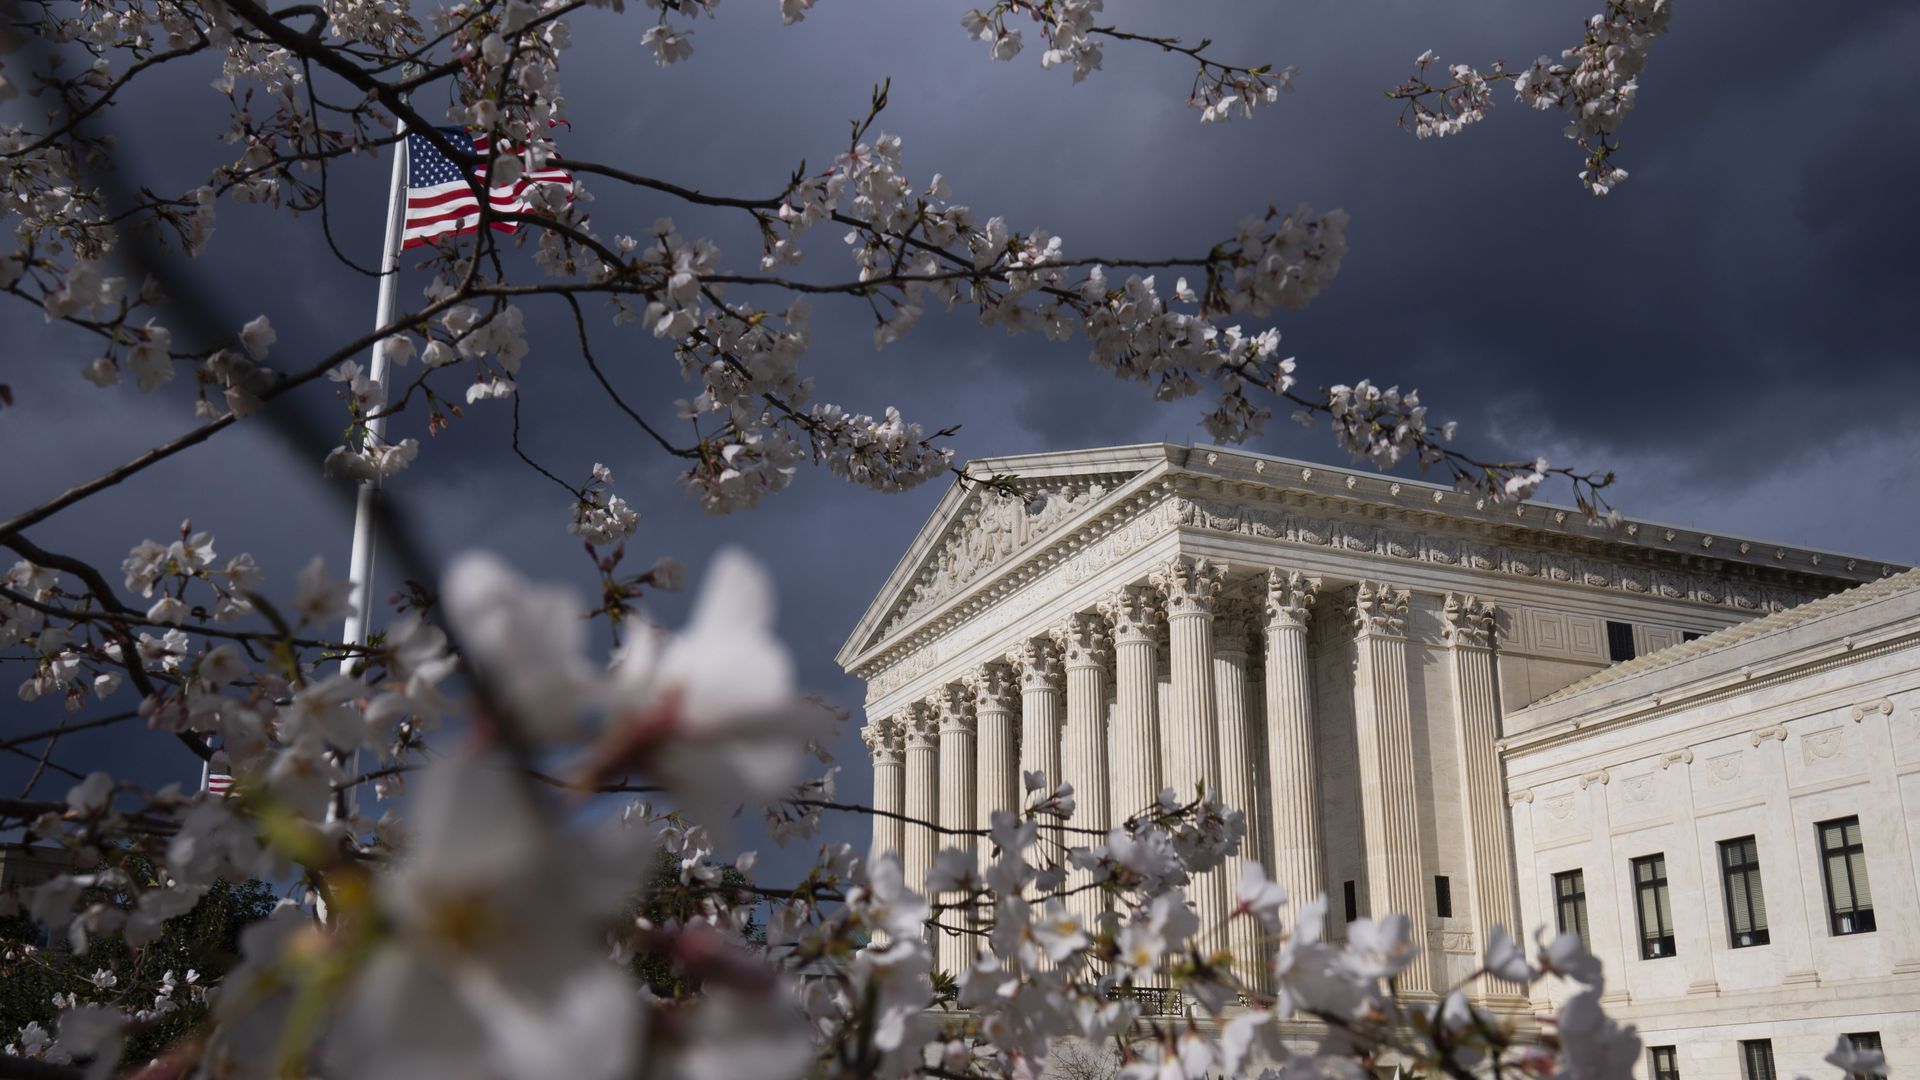 Picture of the Supreme Court building taken with cherry blossom trees in front of it